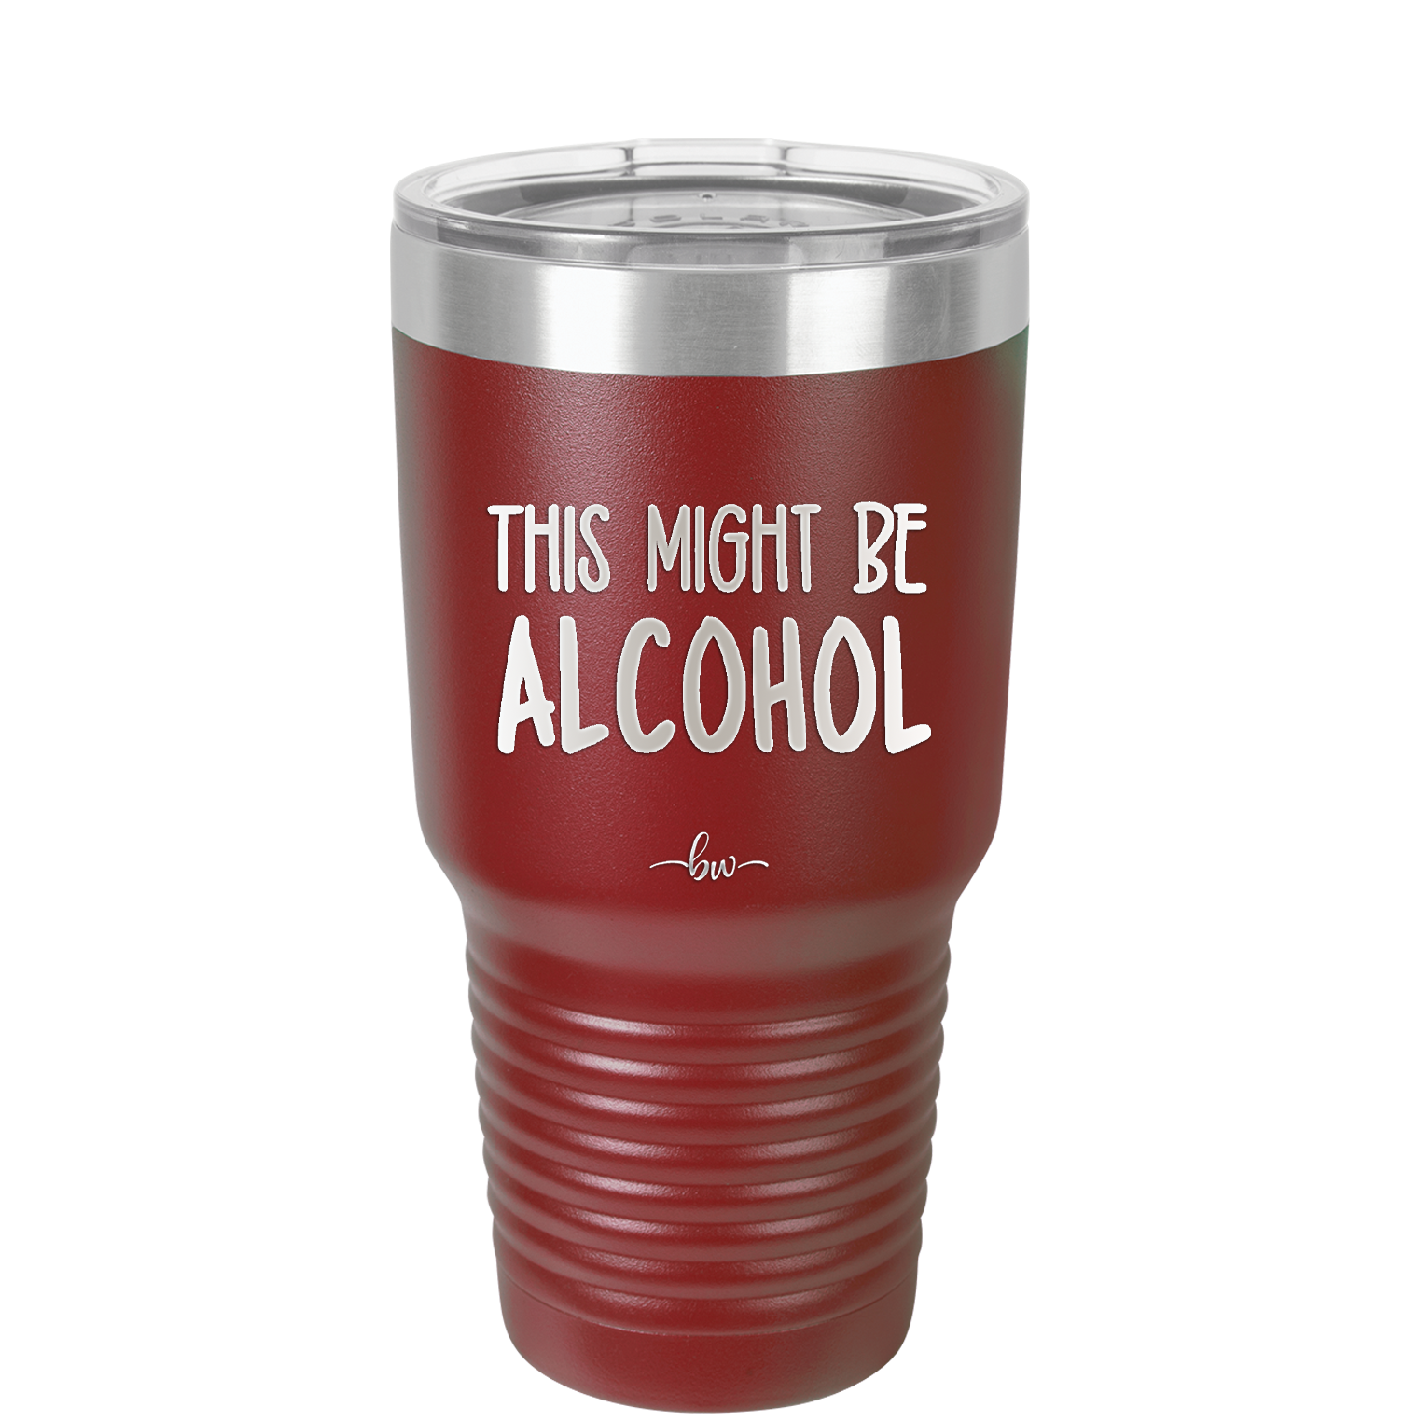 This Might Be Alcohol - Laser Engraved Stainless Steel Drinkware - 1001 -